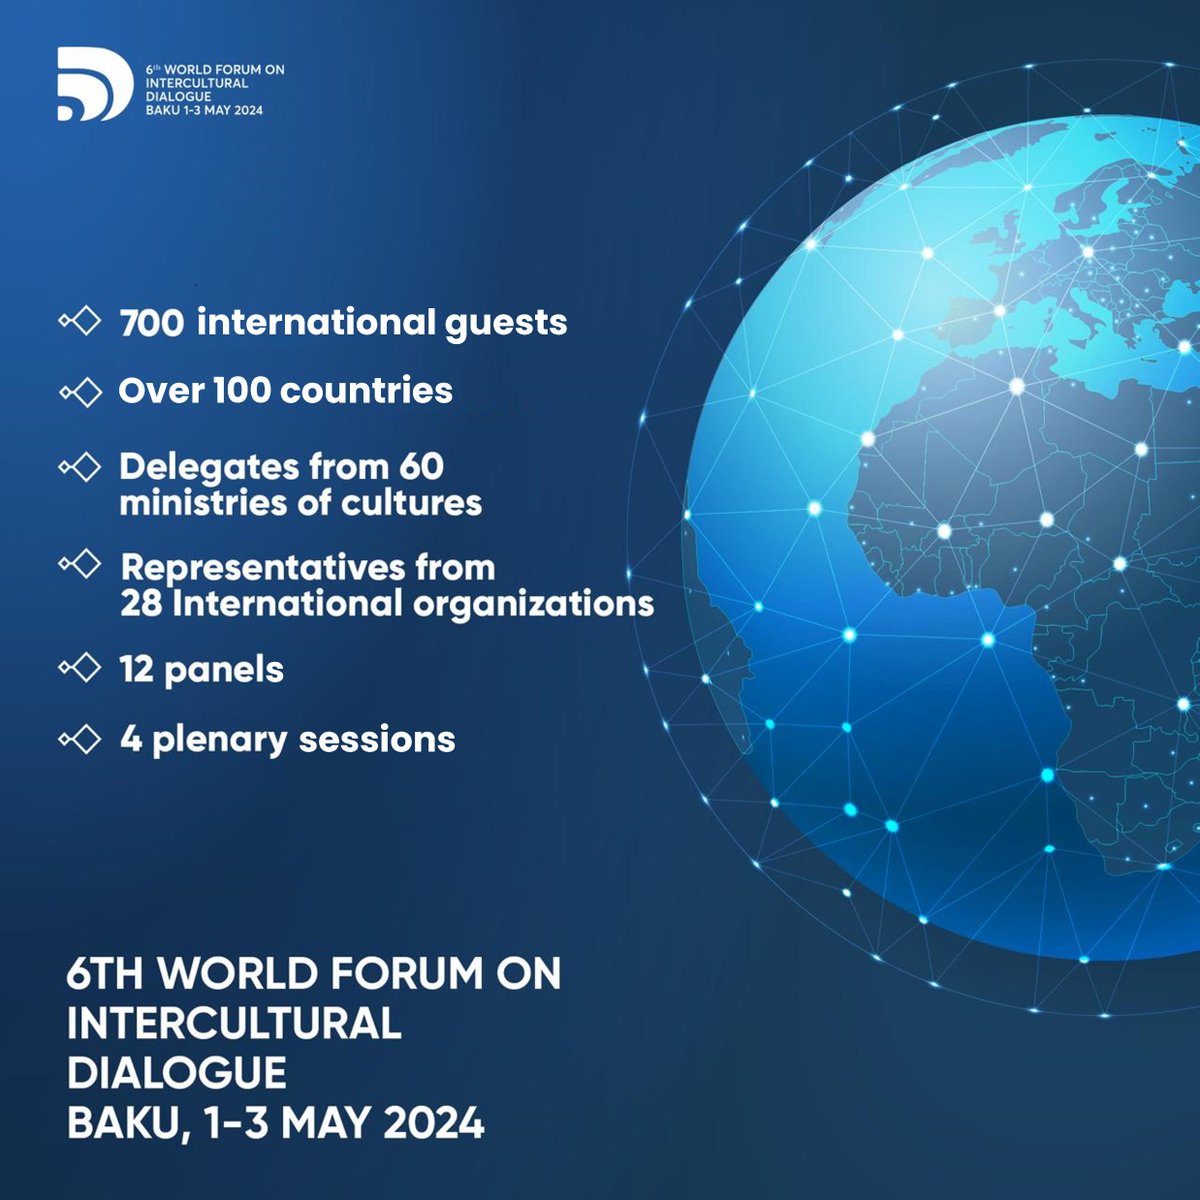 VI World Forum of Intercultural Dialogue Finalizes Registration Process with 700 Foreign Guests Confirmed

Details: t.ly/nokXF

#Azerbaijan #WFID6 #DialogueForum #BakuProcess2024 #PeaceThroughDialogue #Dialogue4PeaceandGlobalSecurity #forum #multiculturalism